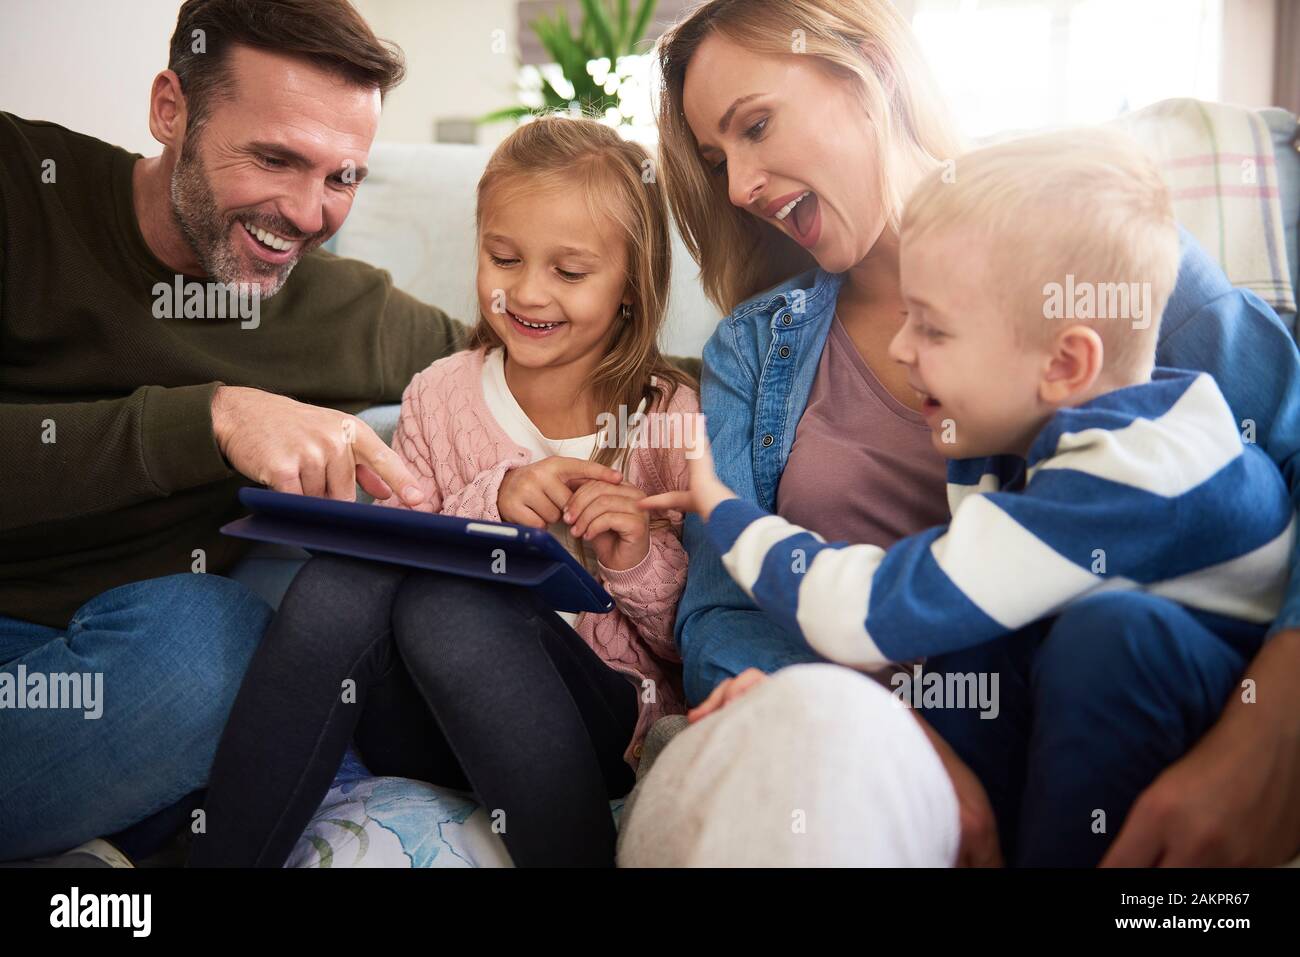 Family with tablet spending time together in living room Stock Photo